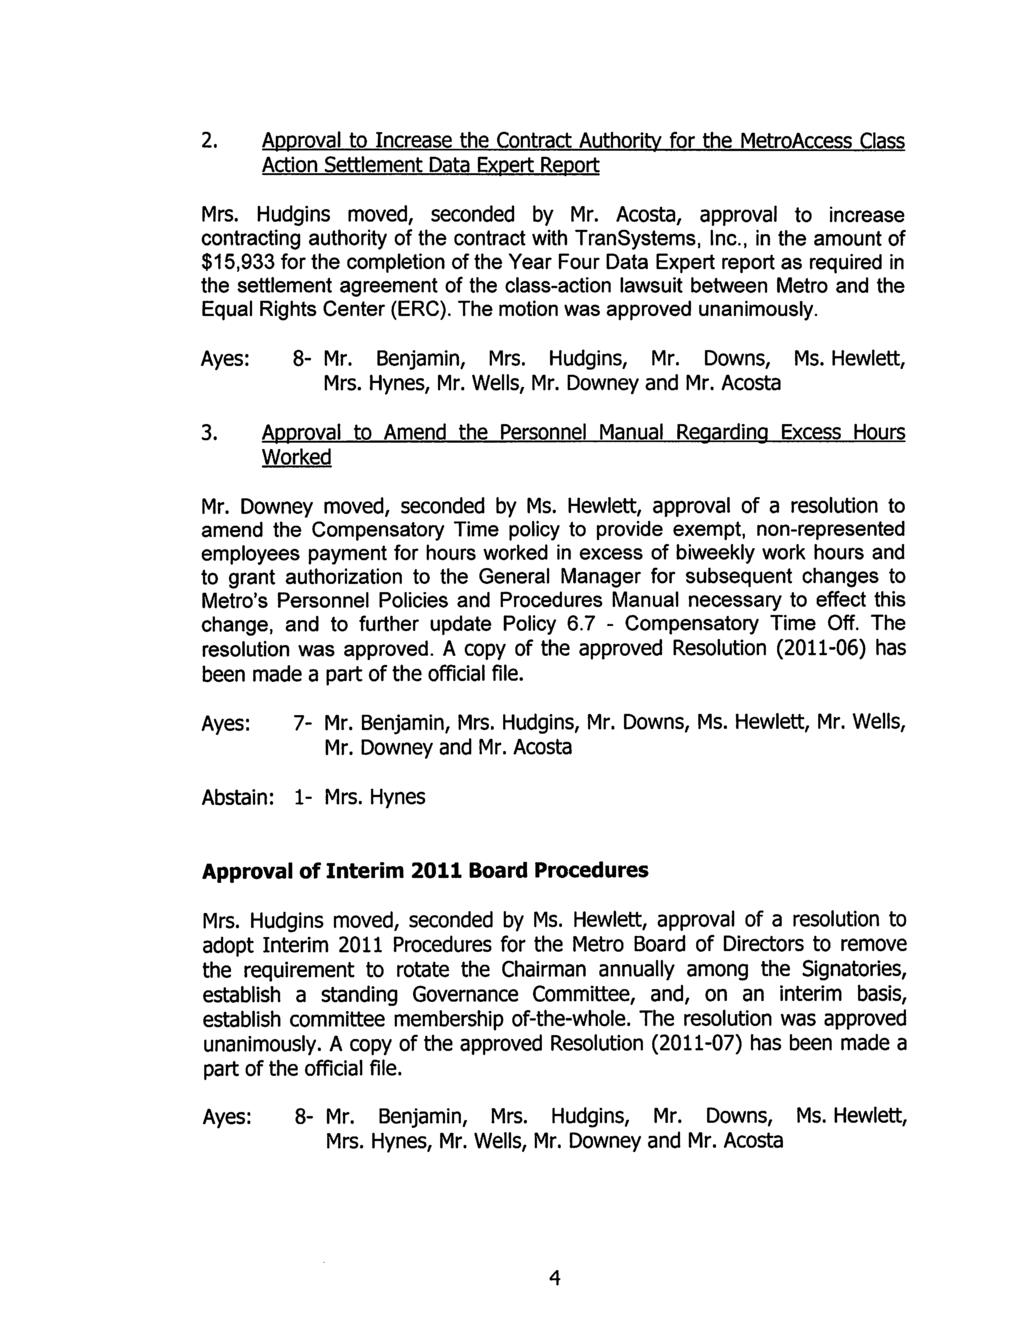 2. Approval to Increase the Contract Authority for the MetroAccess Class Action Settlement Data Expert Report Mrs. Hudgins moved, seconded by Mr.